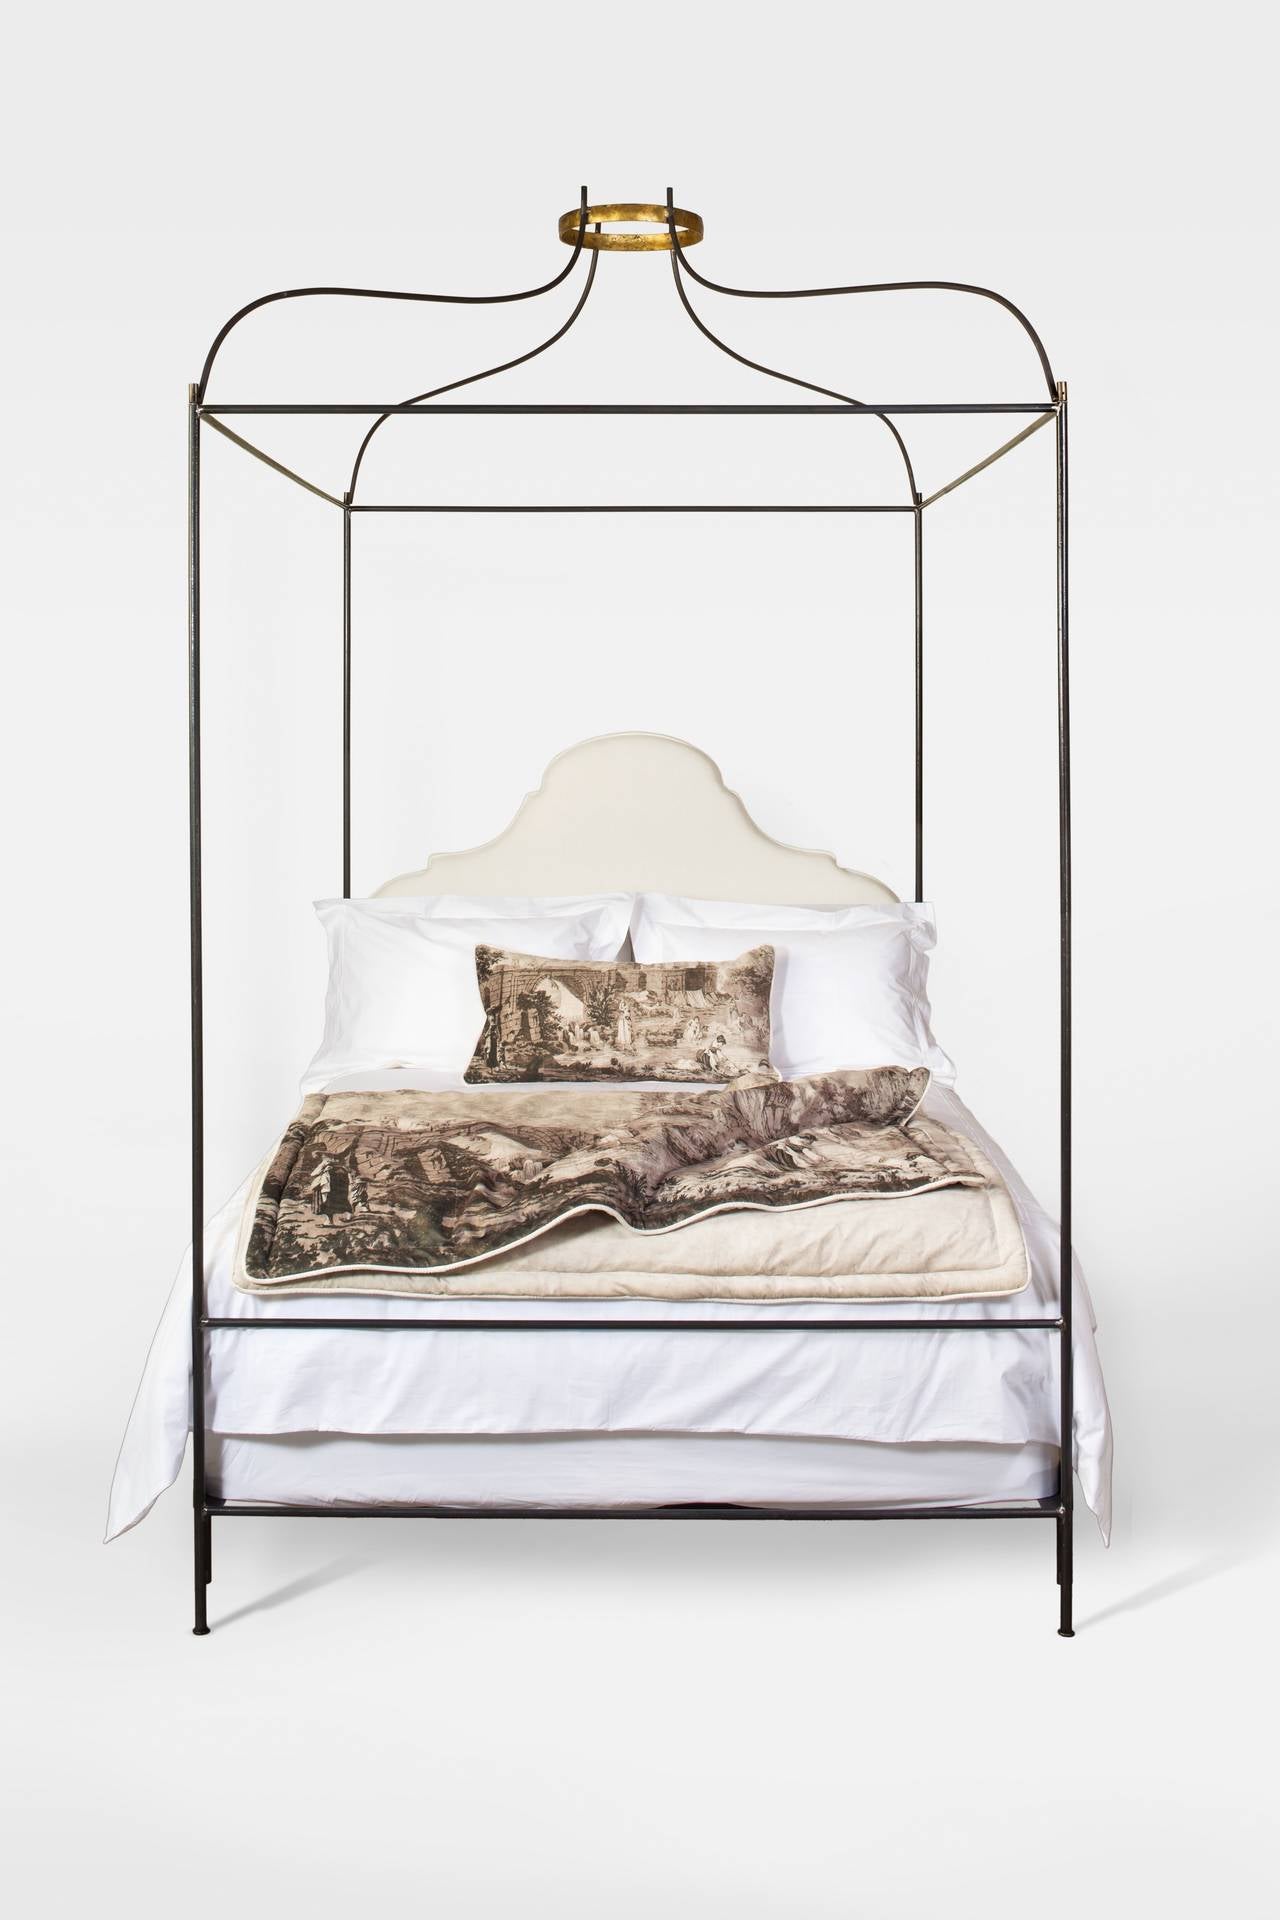 This Venetian canopy bed with upholstered headboard from the Tara Shaw Maison collection is one of our most popular custom beds. hand forged gilded or silver leaf crown and small detail at feet. Handcrafted in New Orleans. Standard headboard